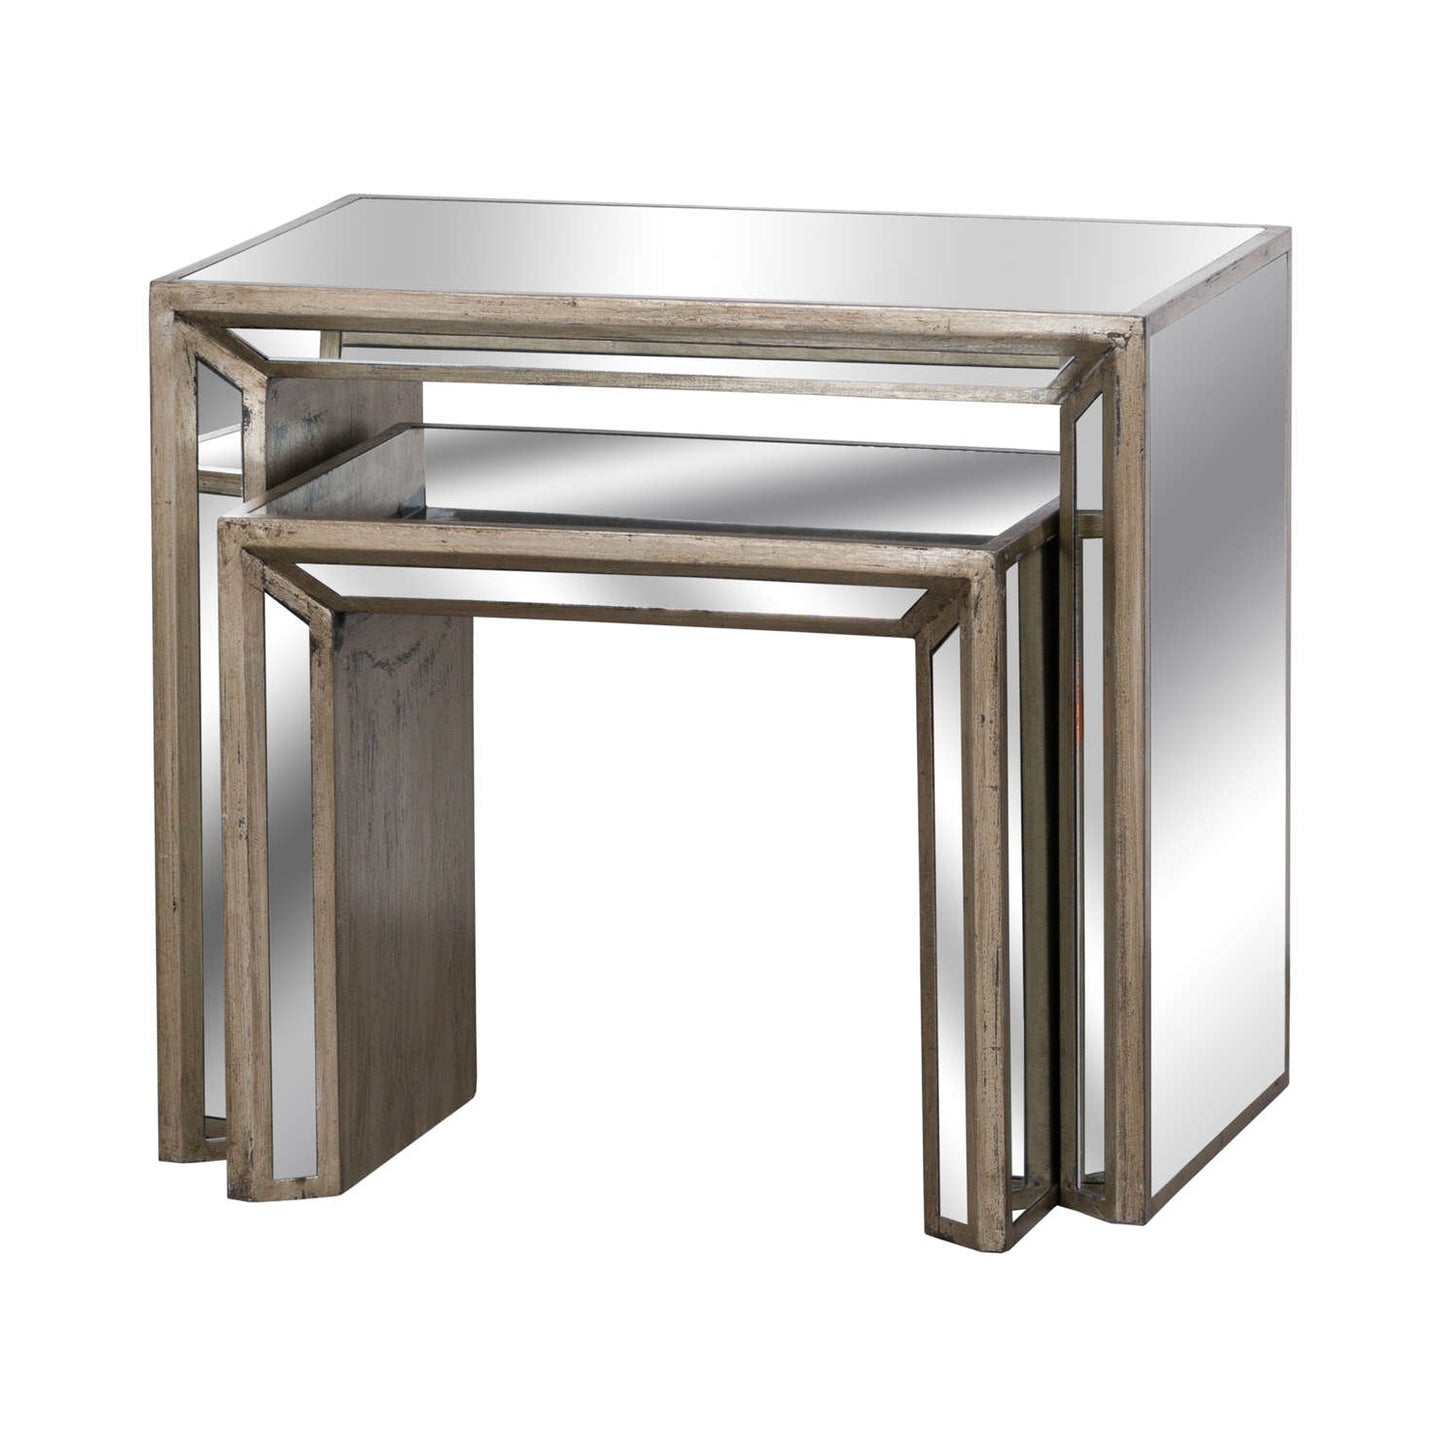 Augustus mirrored nest of tables